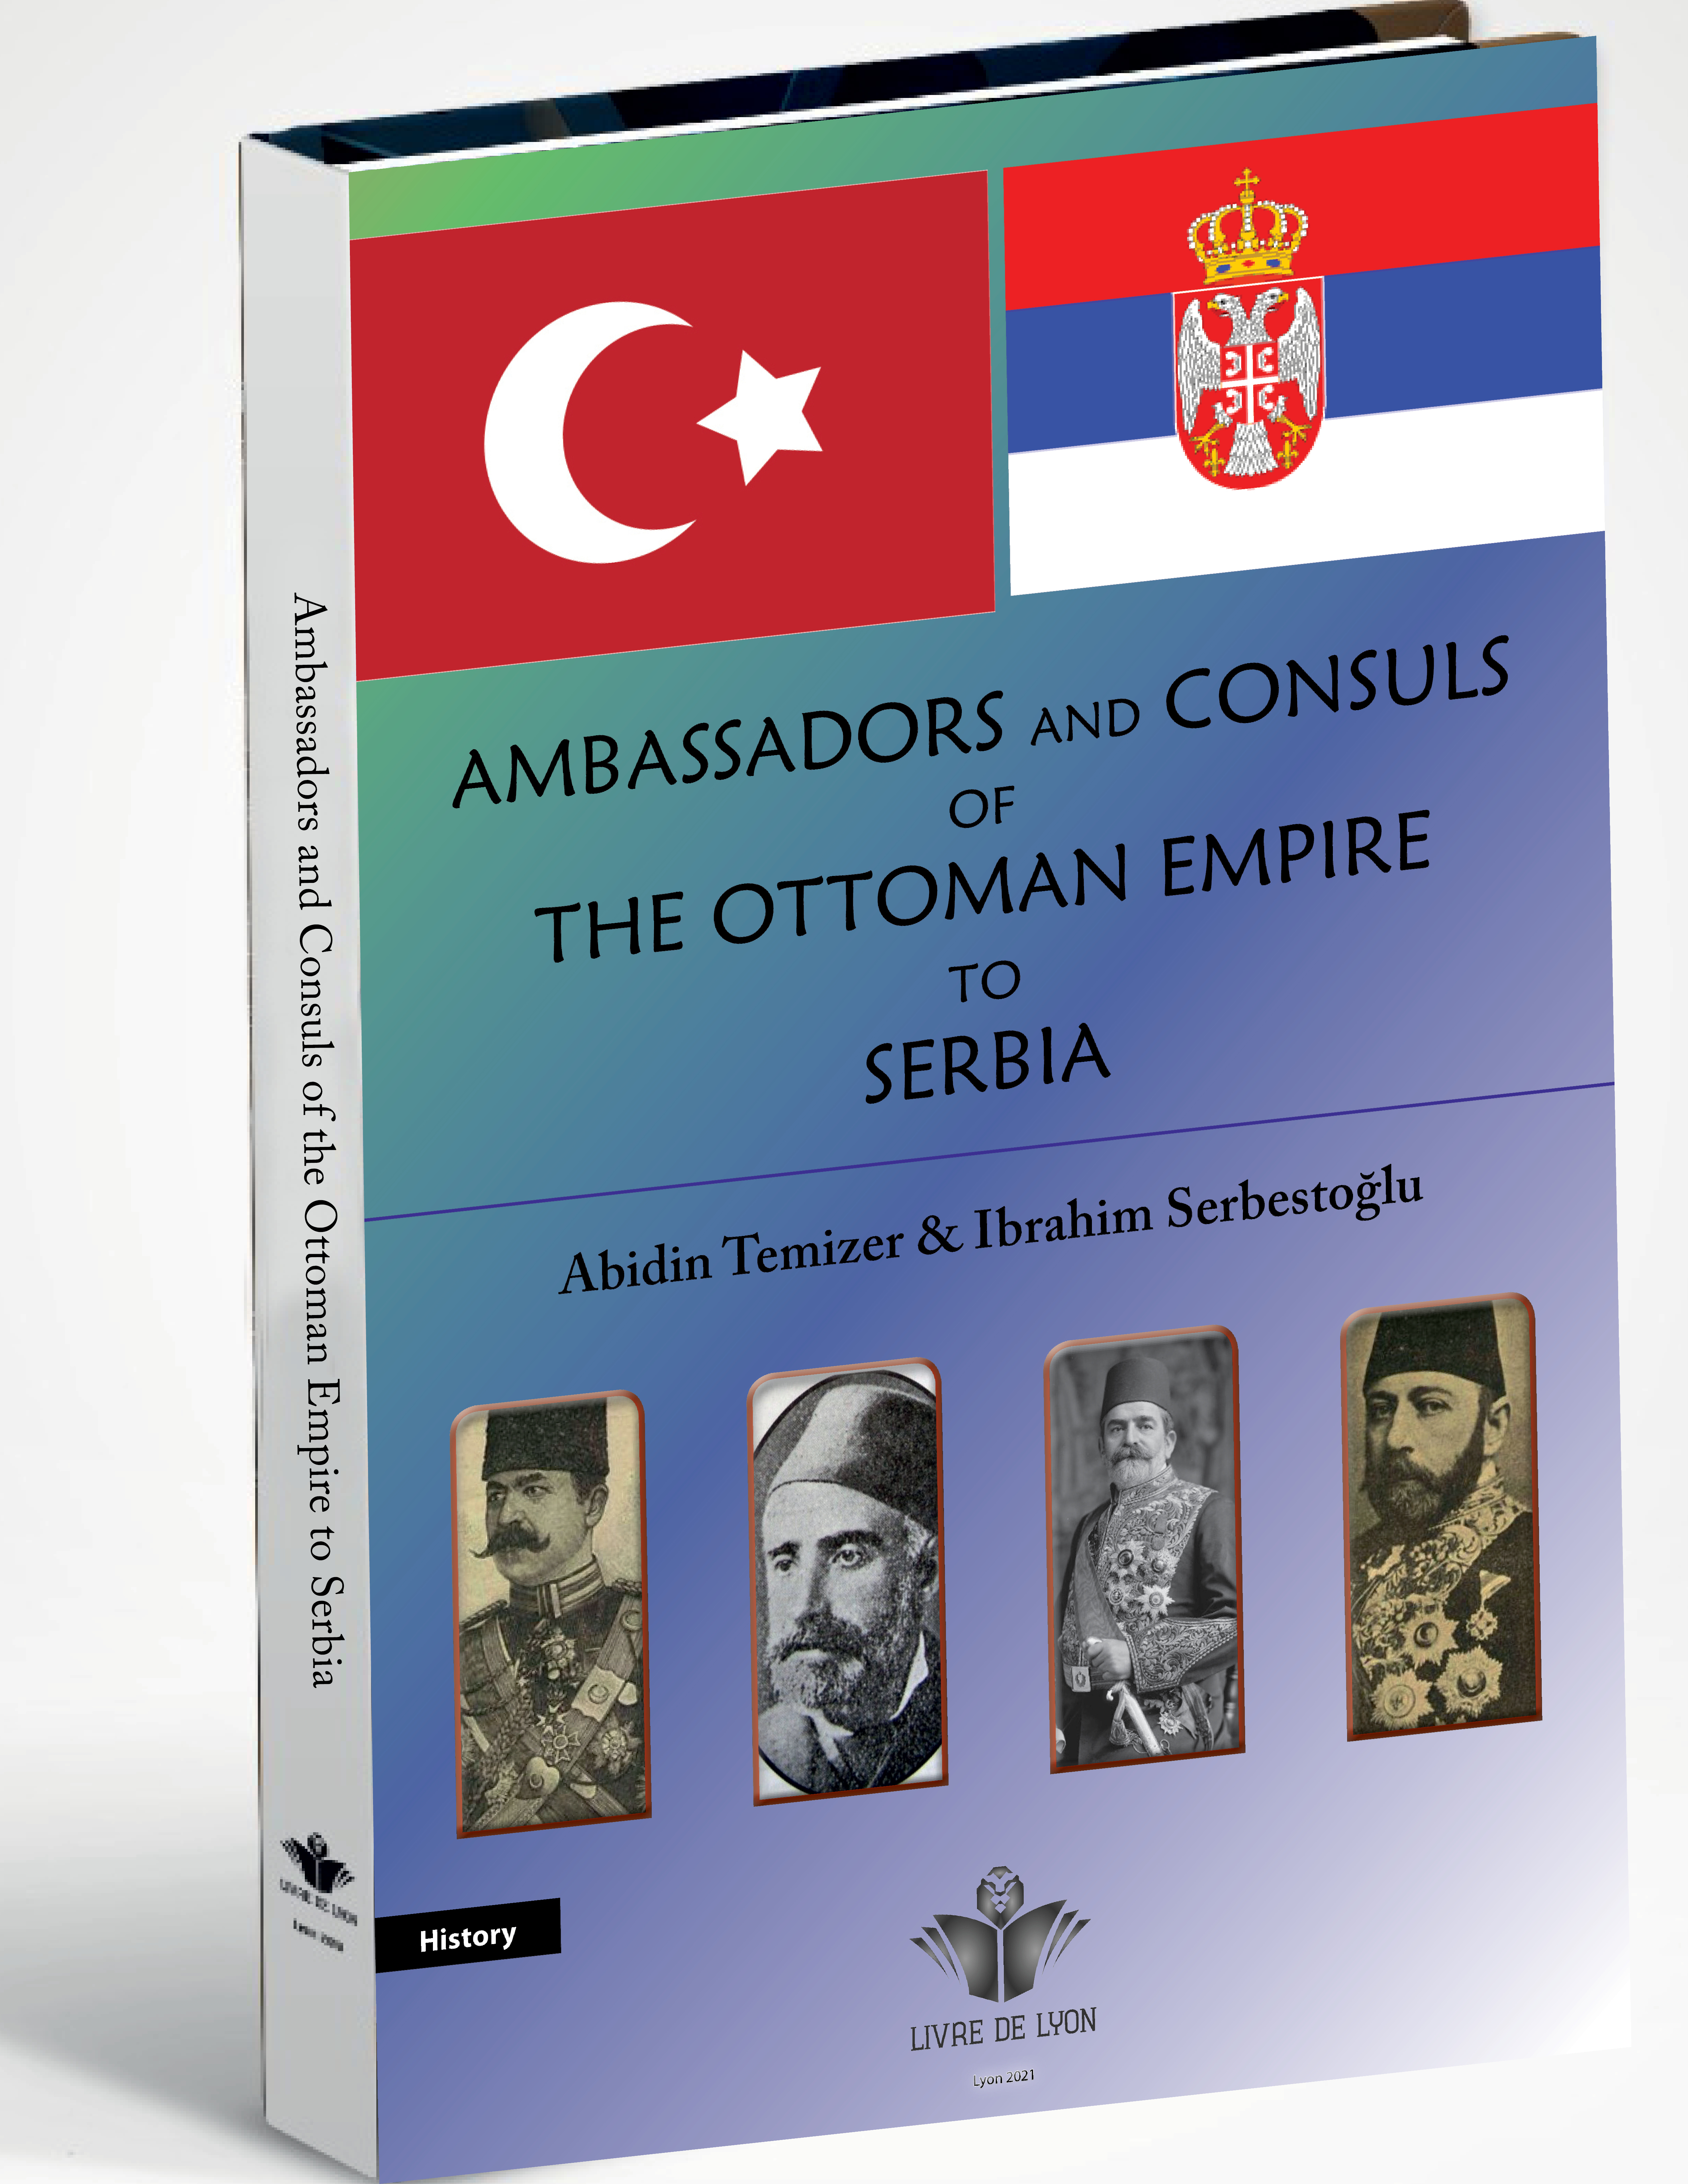 Ambassadors and Consuls of The Ottoman Empire to Serbia